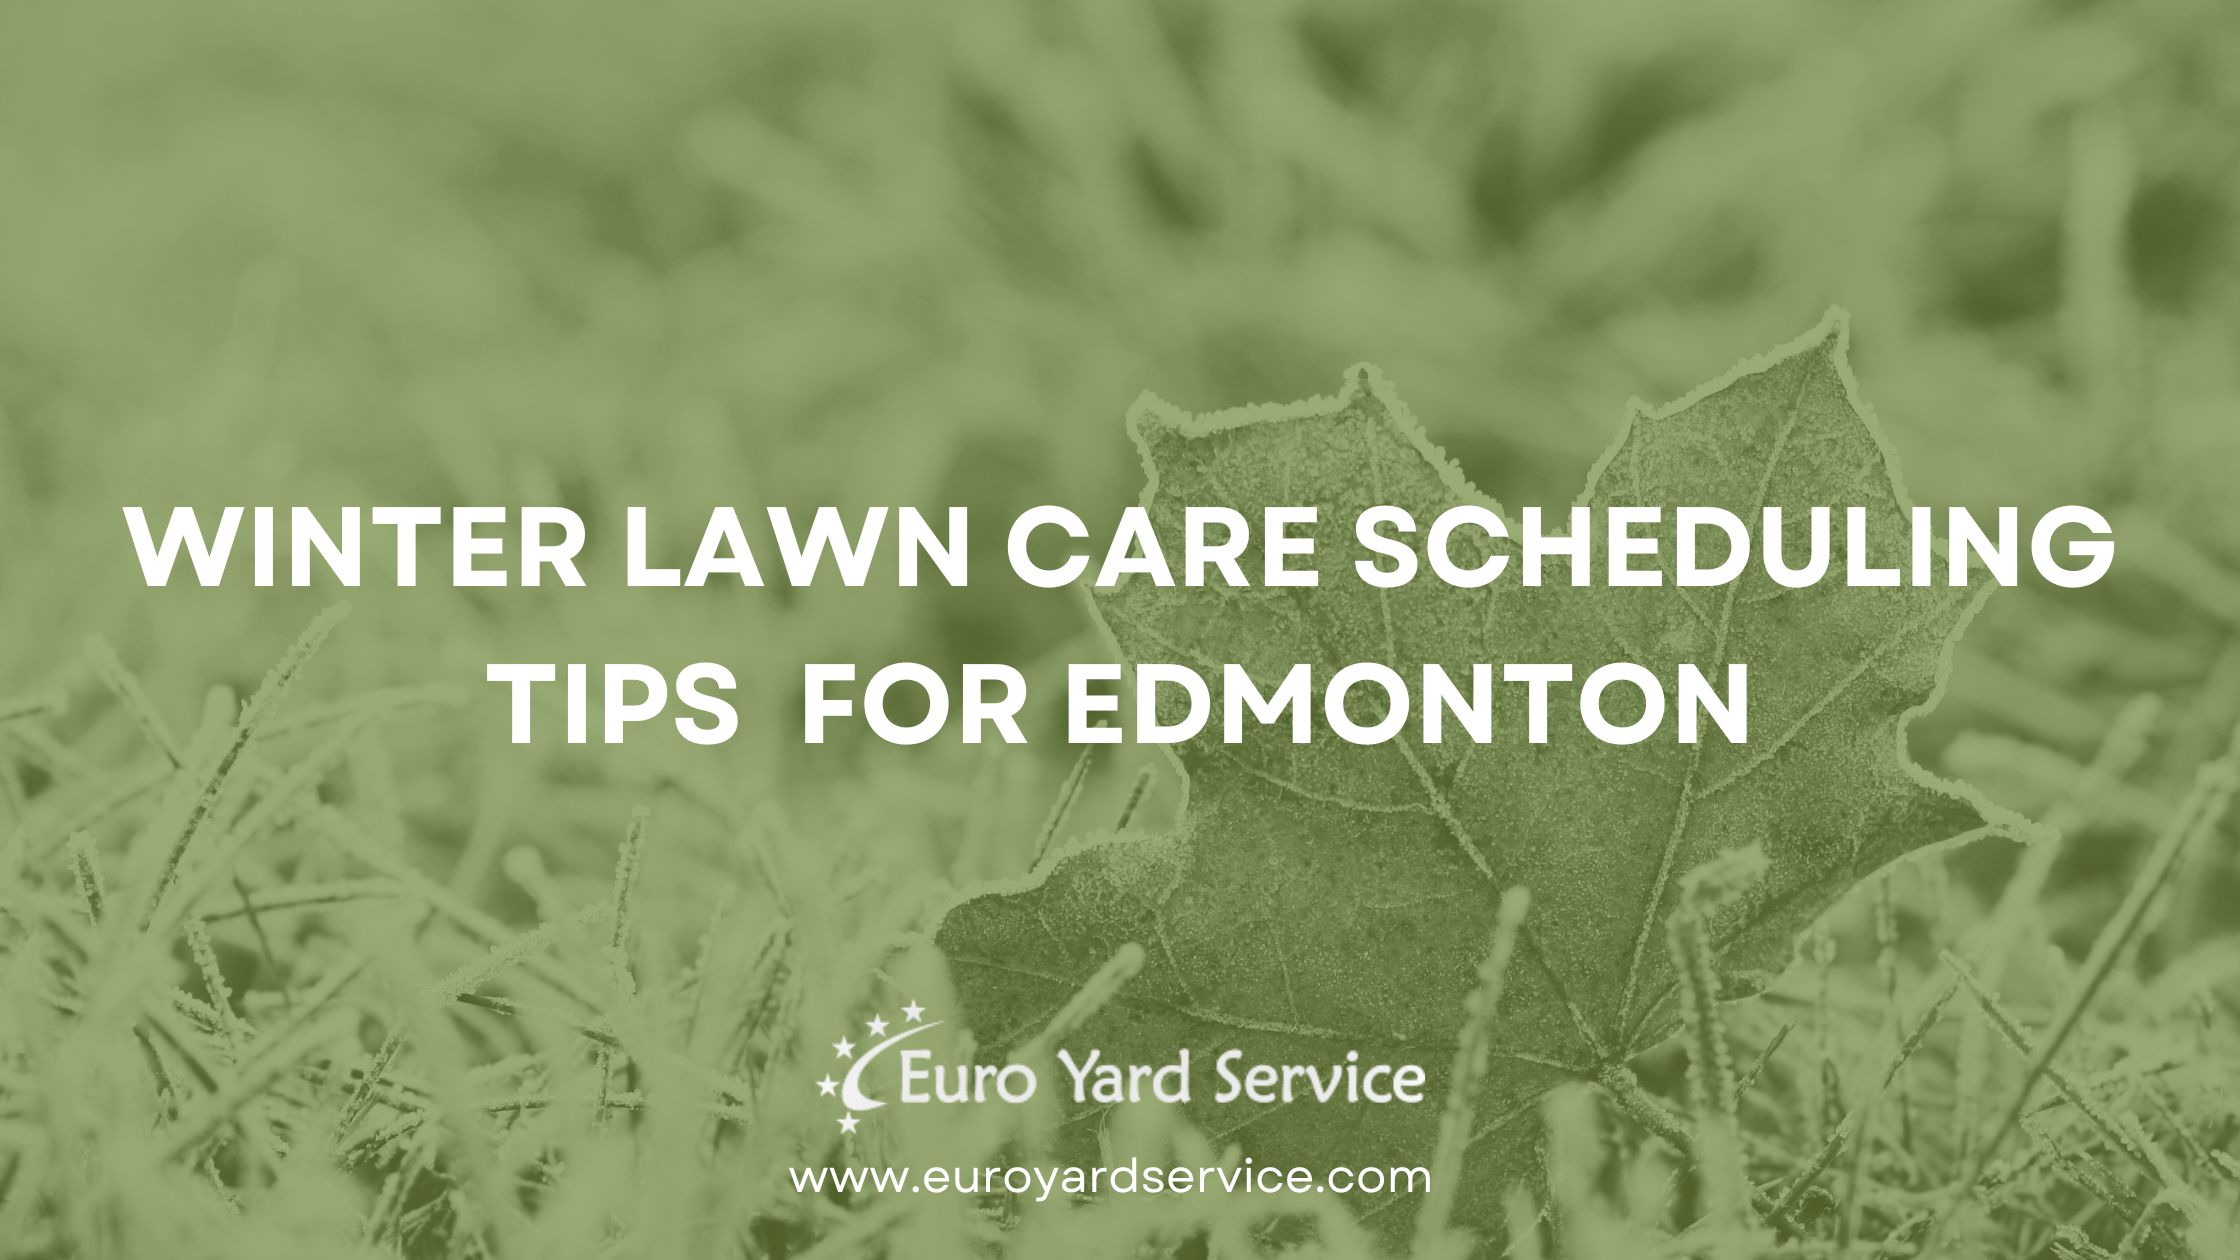 Winter Lawn Care Scheduling Tips for Edmonton